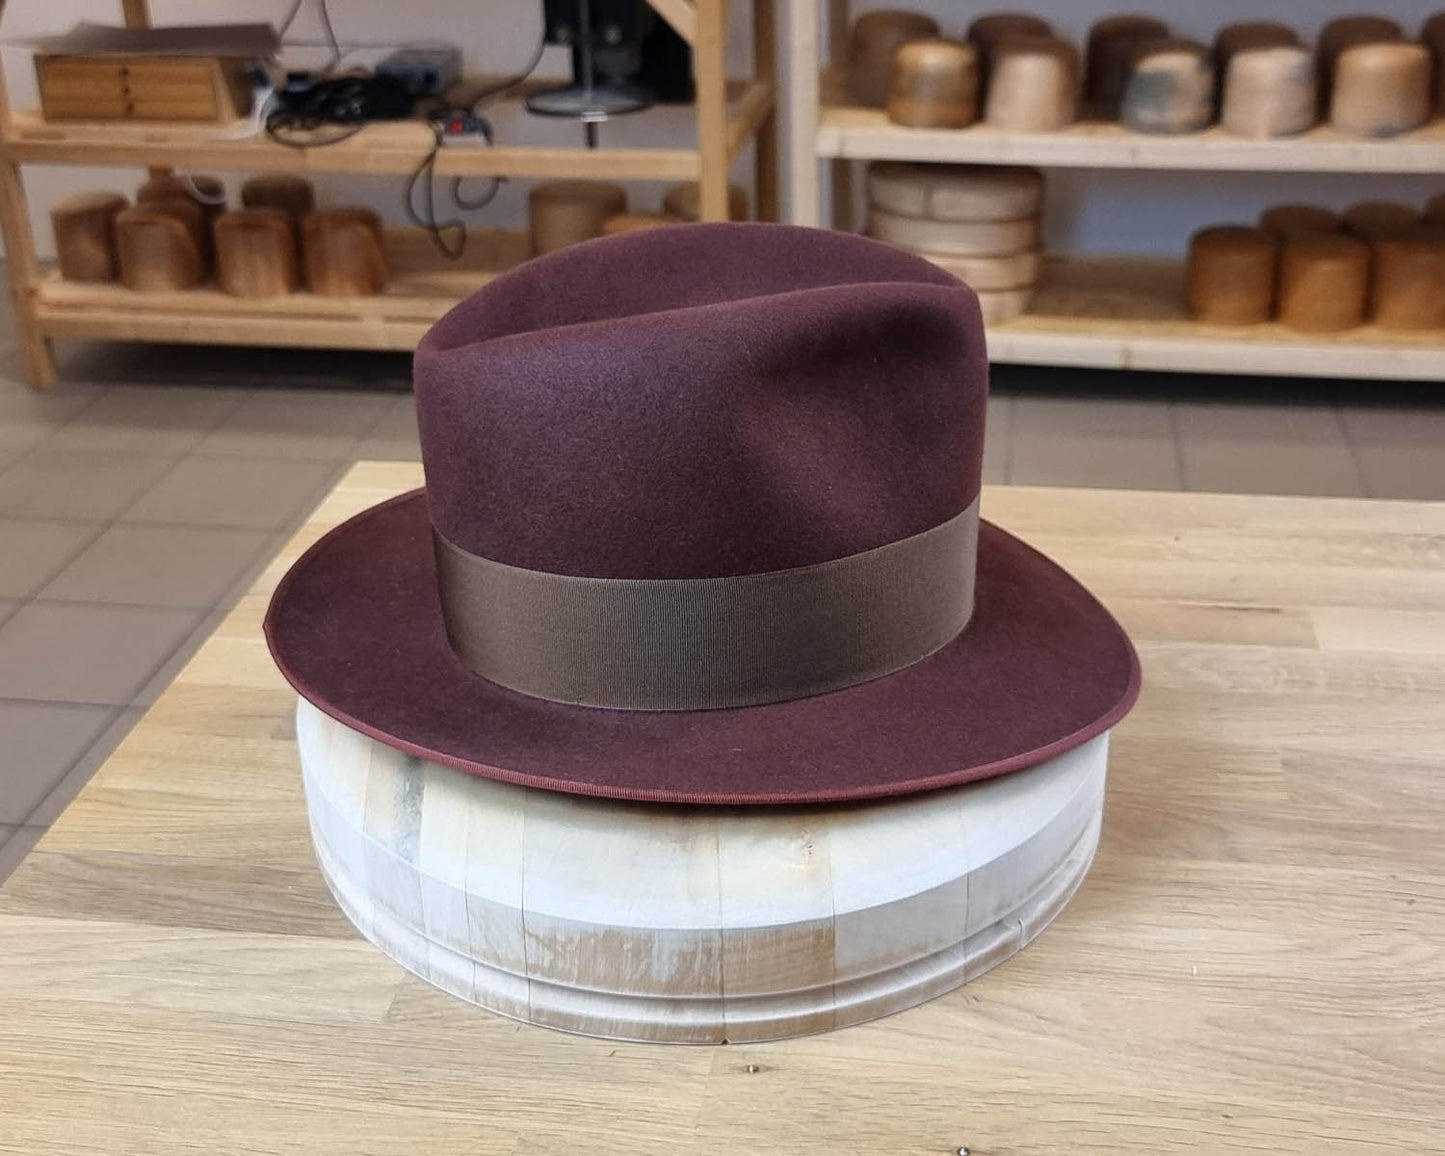 CAGNEY FEDORA | RUSTIC COPPER COLOR | 100X BEAVER | SIZE 59, US 7 3/8